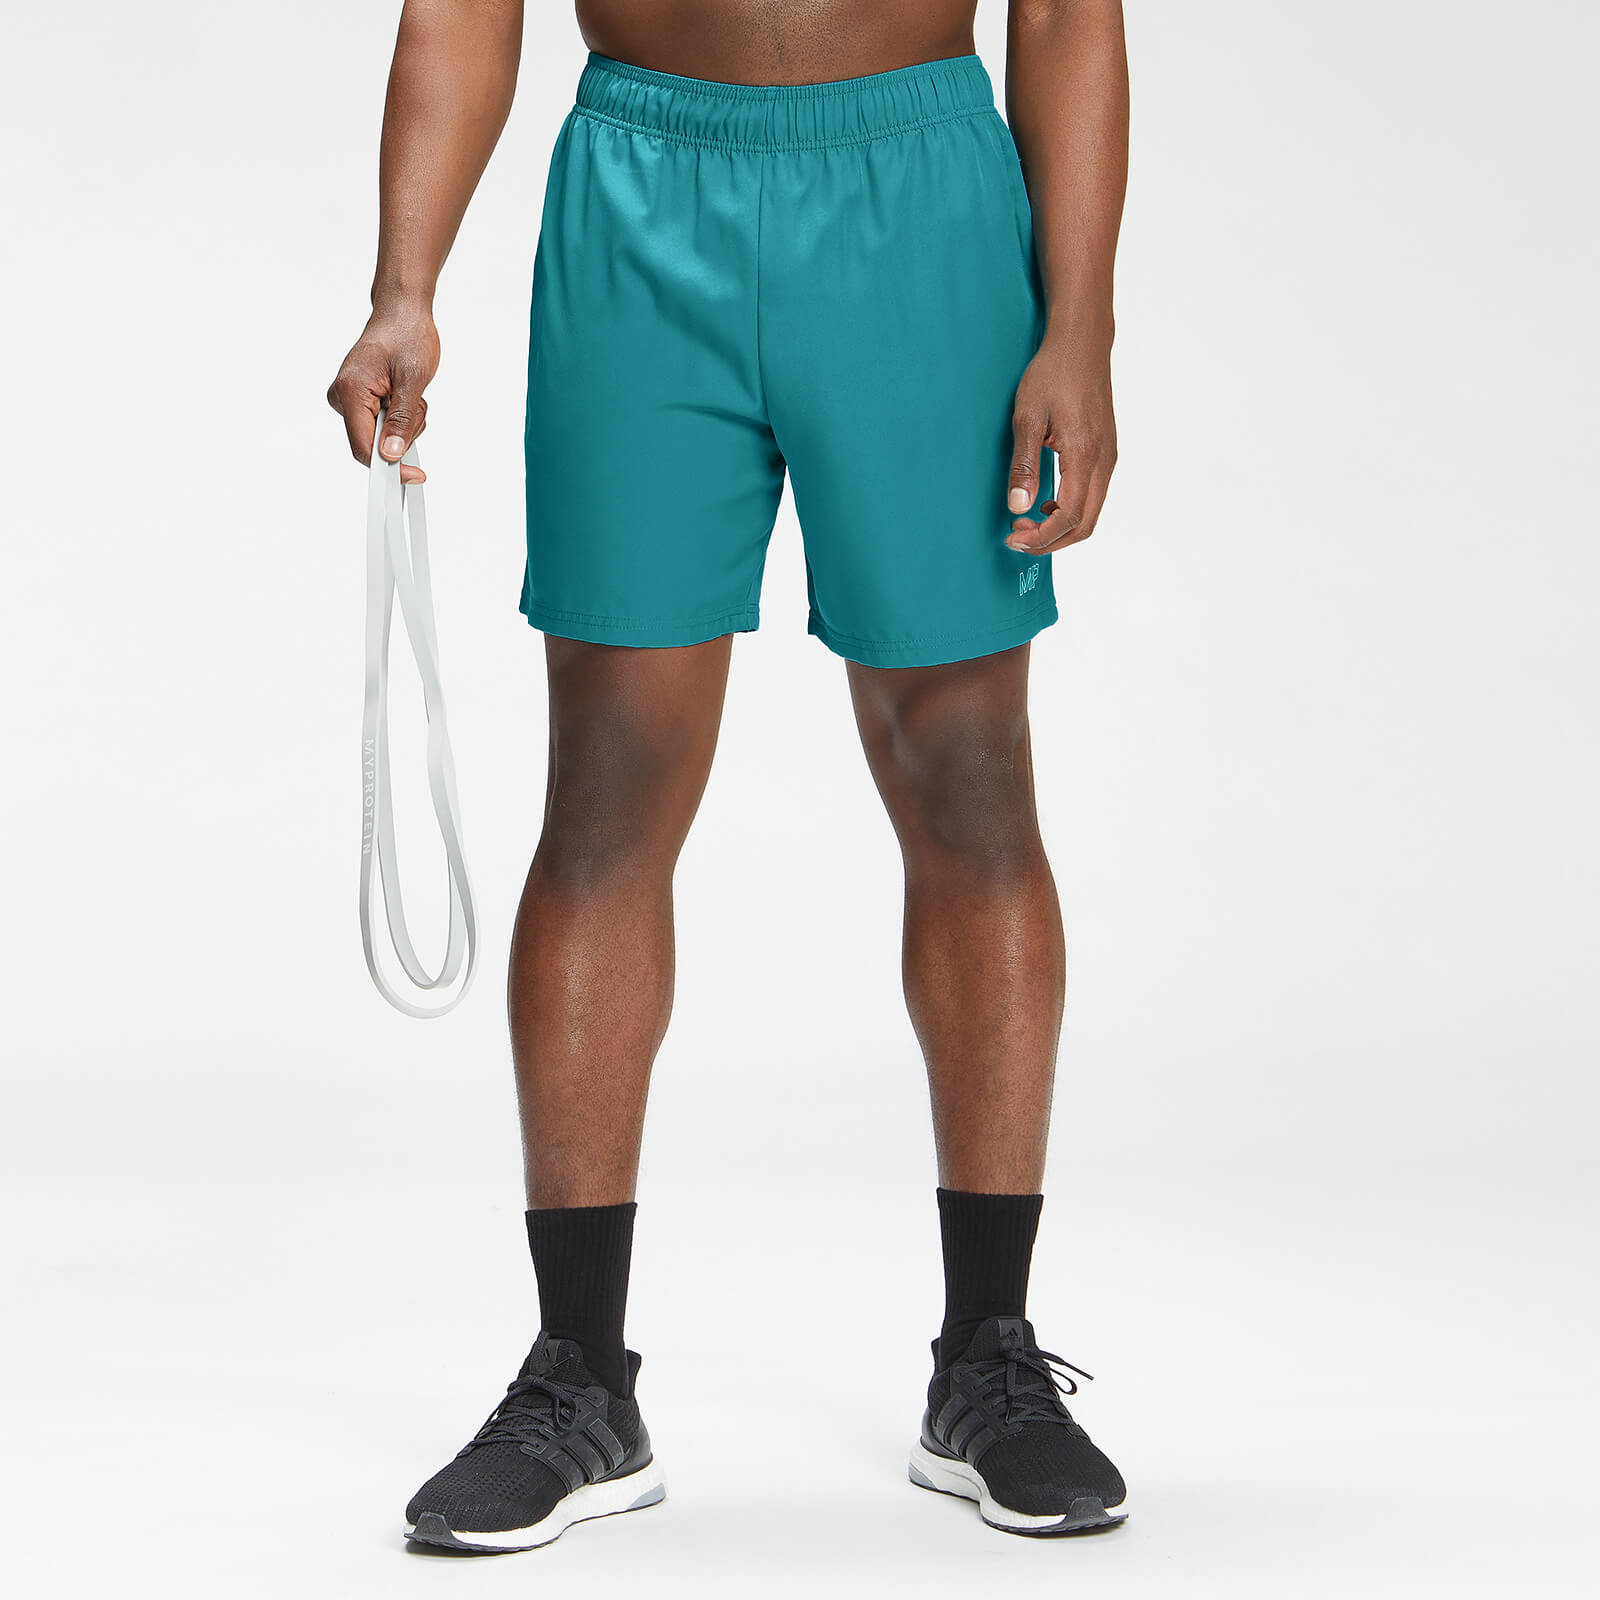 MP Men's Repeat Mark Graphic Training Shorts   Teal   MP - XXS